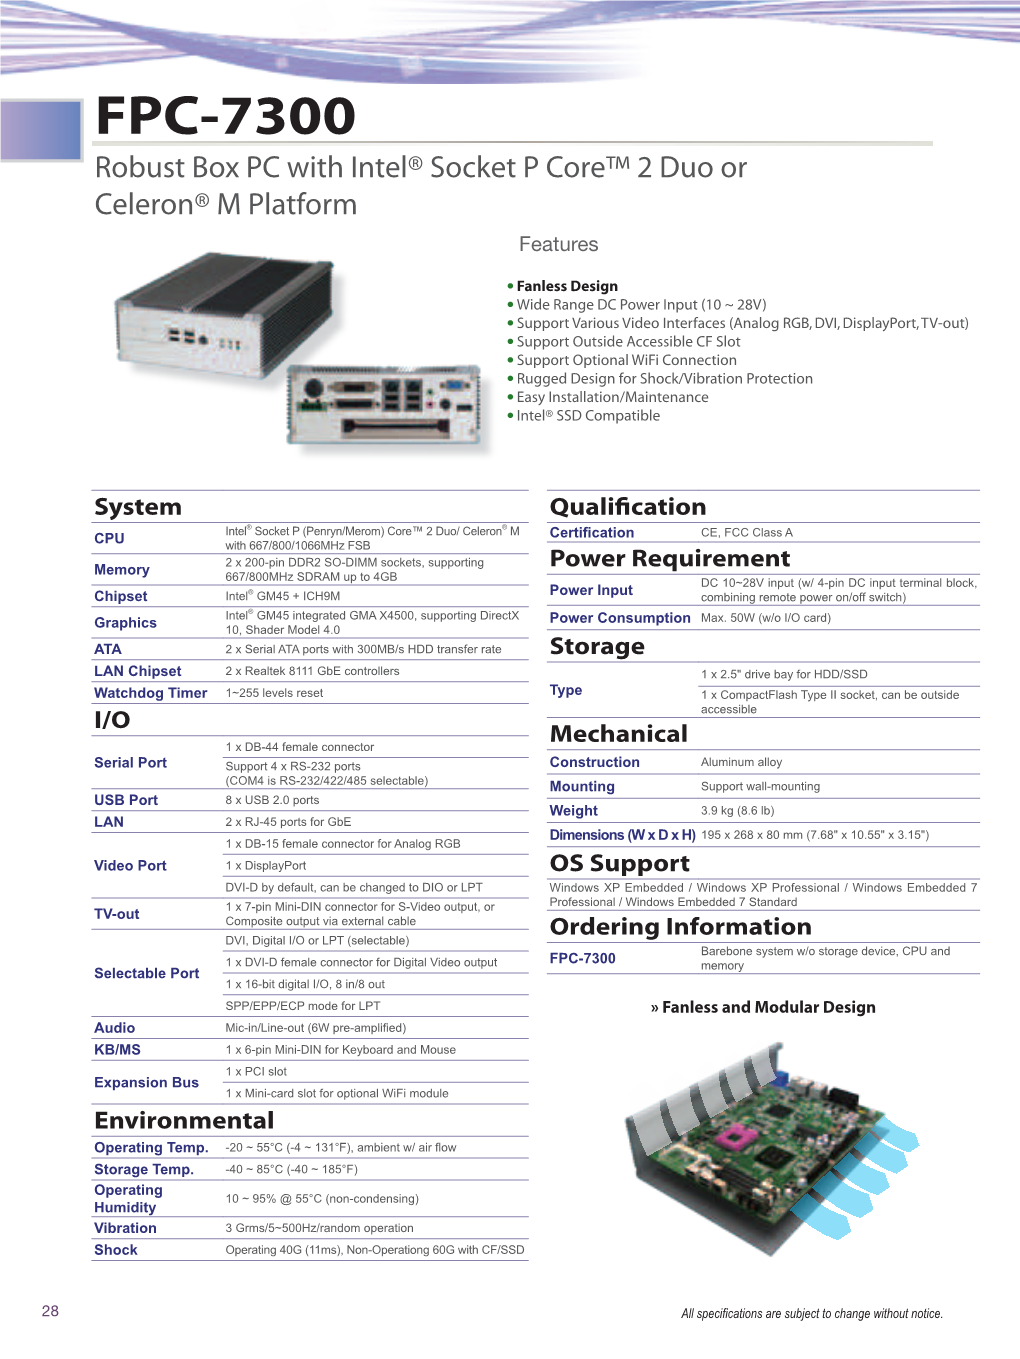 FPC-7300 Robust Box PC with Intel® Socket P Core™ 2 Duo Or Celeron® M Platform Features